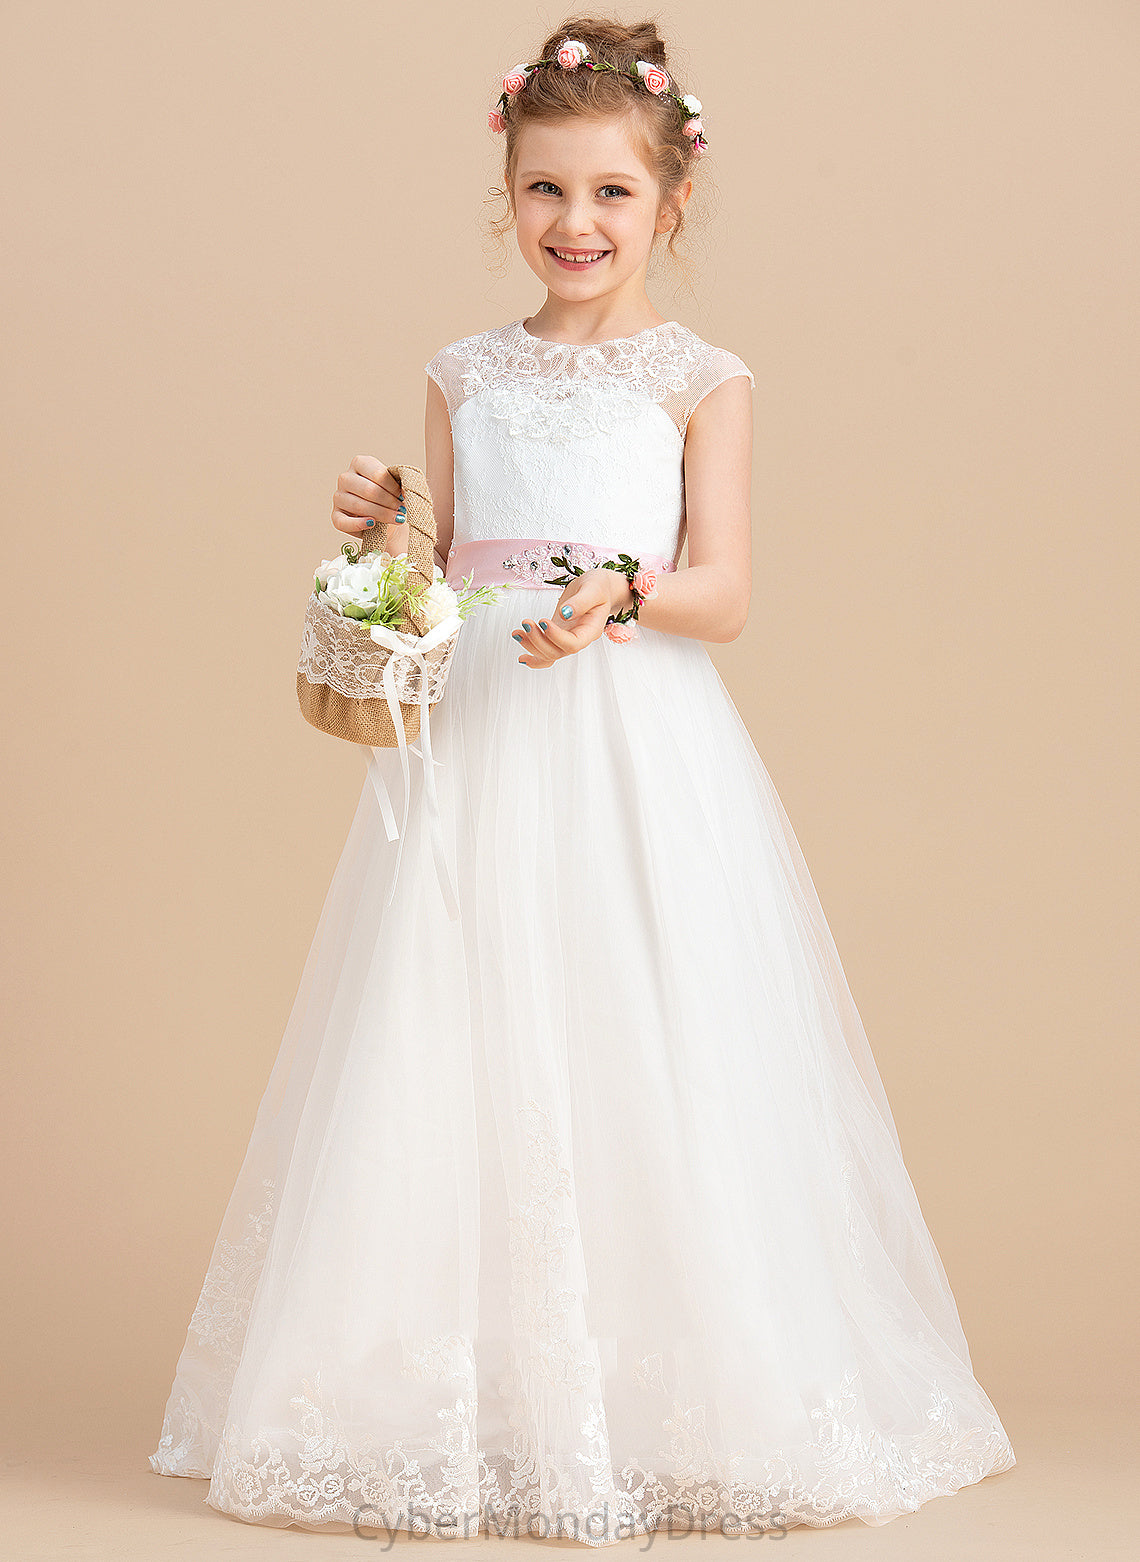 Neck With (Petticoat Flower Girl Dresses Floor-length Tulle/Lace Jode NOT Sleeveless Flower - Girl Ball-Gown/Princess Sash/Beading/Appliques/Bow(s) included) Scoop Dress